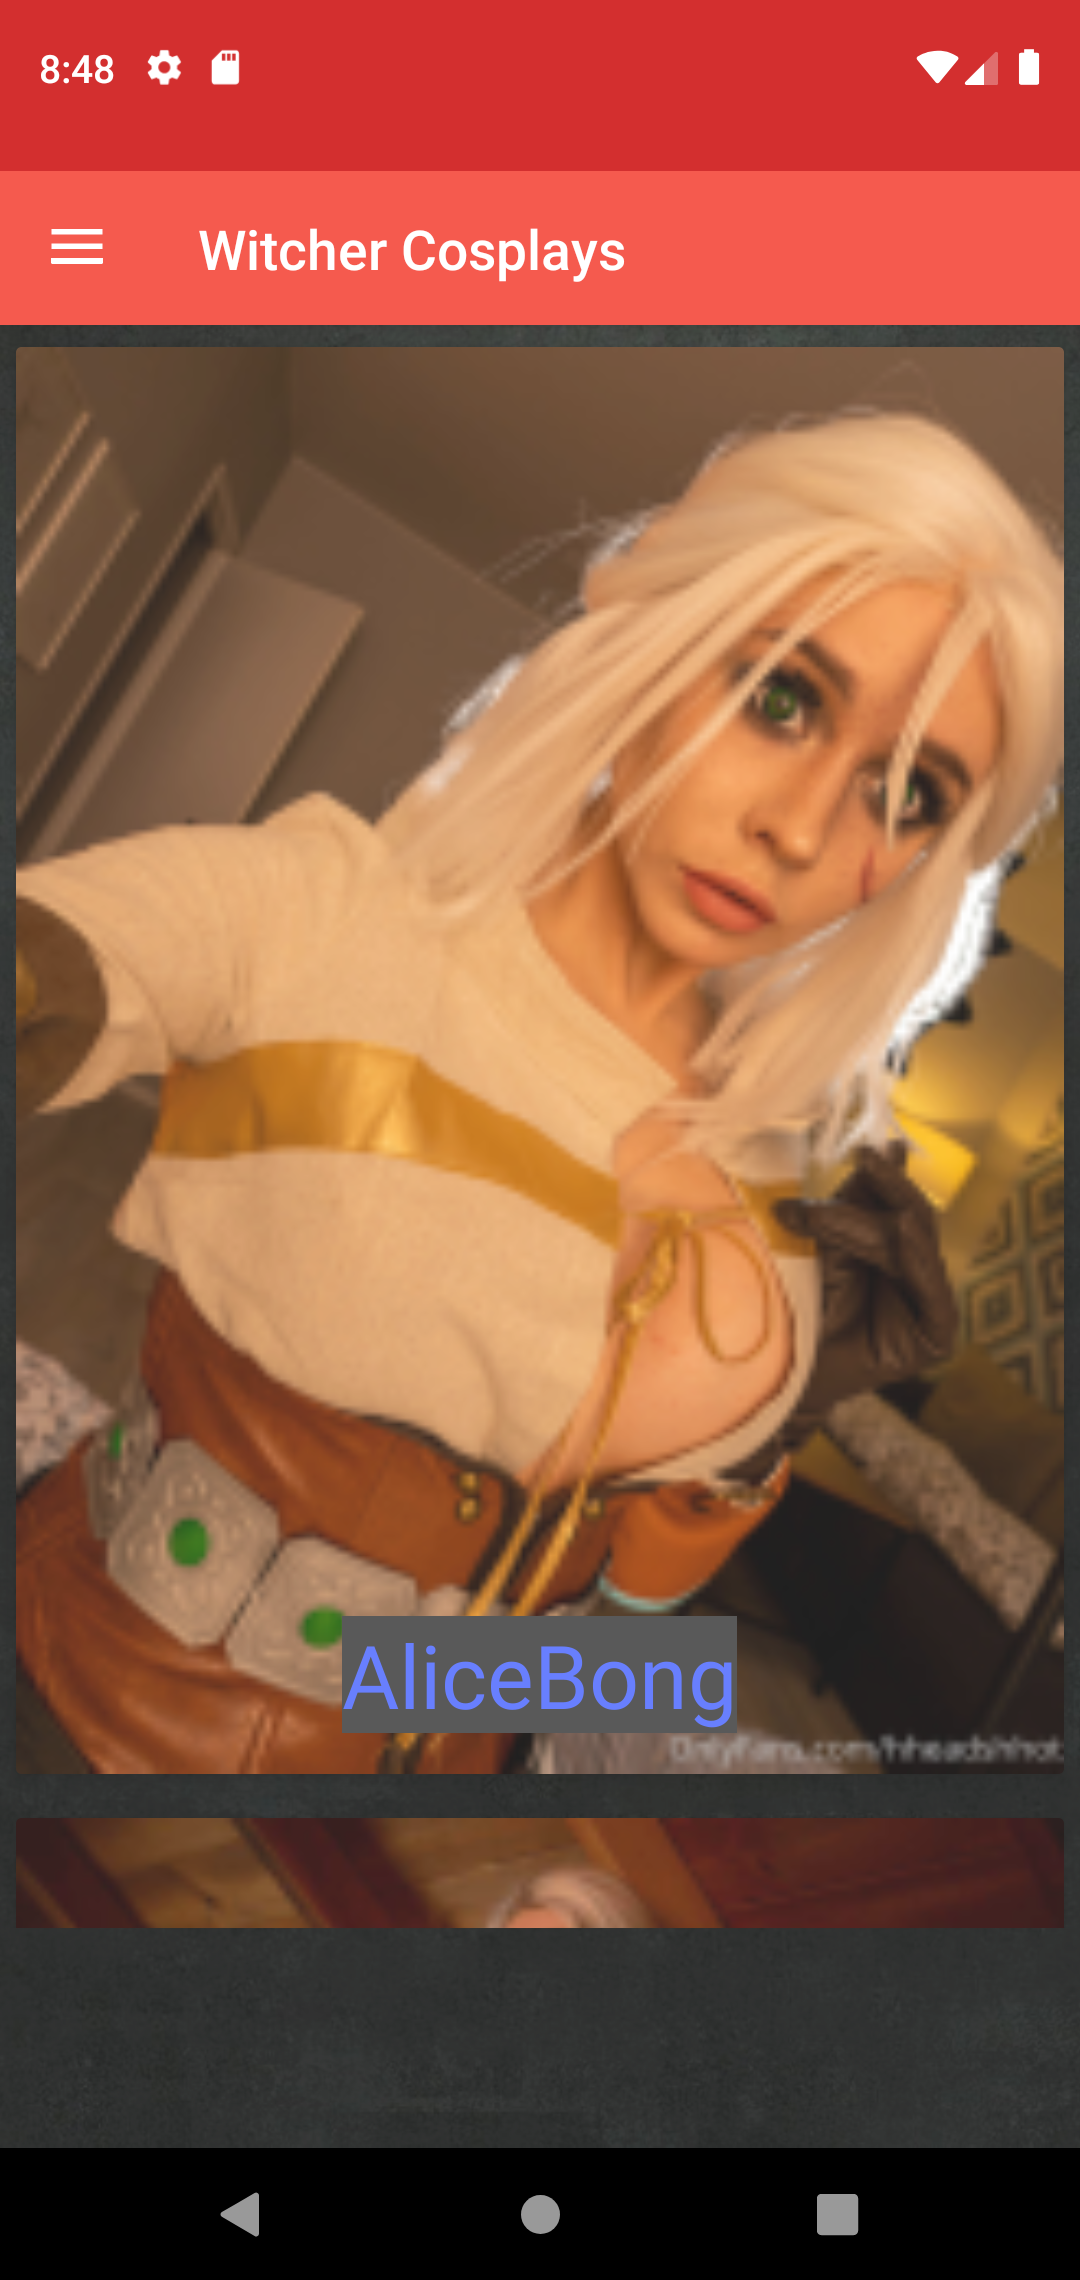 Witcher Cosplays cosplay,erotic,apps,witcher,heanti,hentai,star,download,hot,sexy,pics,android,comics,pic,market,porn,anime,collection,hentay,app,doujinshi,apk,image,backgrounds